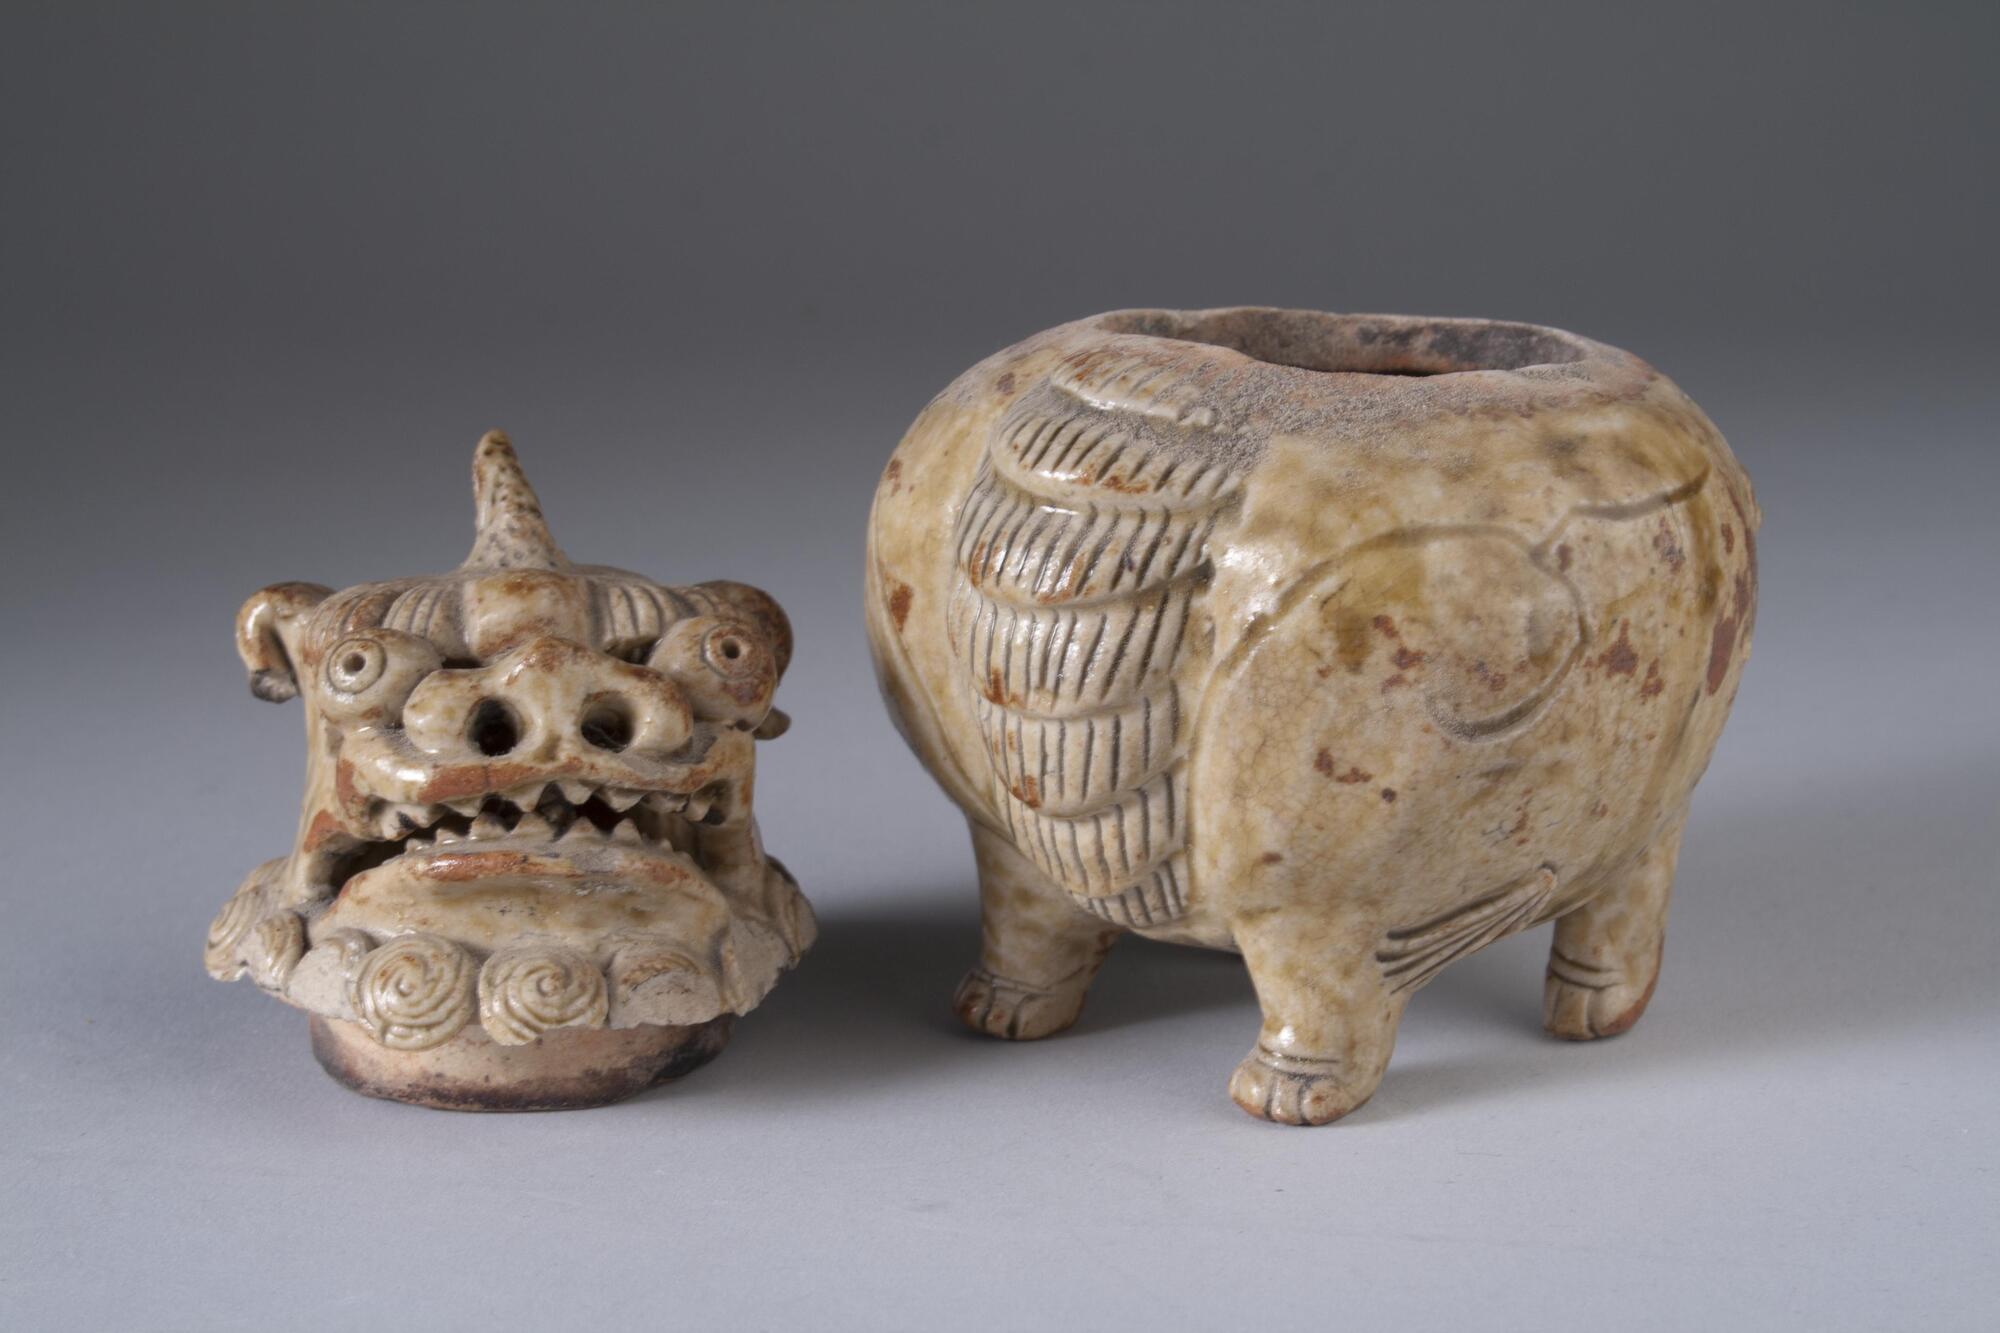 A container with an animal (dragon) shaped head as a lid; four paws at the bottom of the container. Glazed stoneware, sculpted with teeth incisions. Tan with red spots of coloring, partiallyy covered with olive colored gloss over a high-fire red clay. Small swirl design on sides and front area has carving to indicate the front/chest of the animal, sculpted with teeth and incisions.